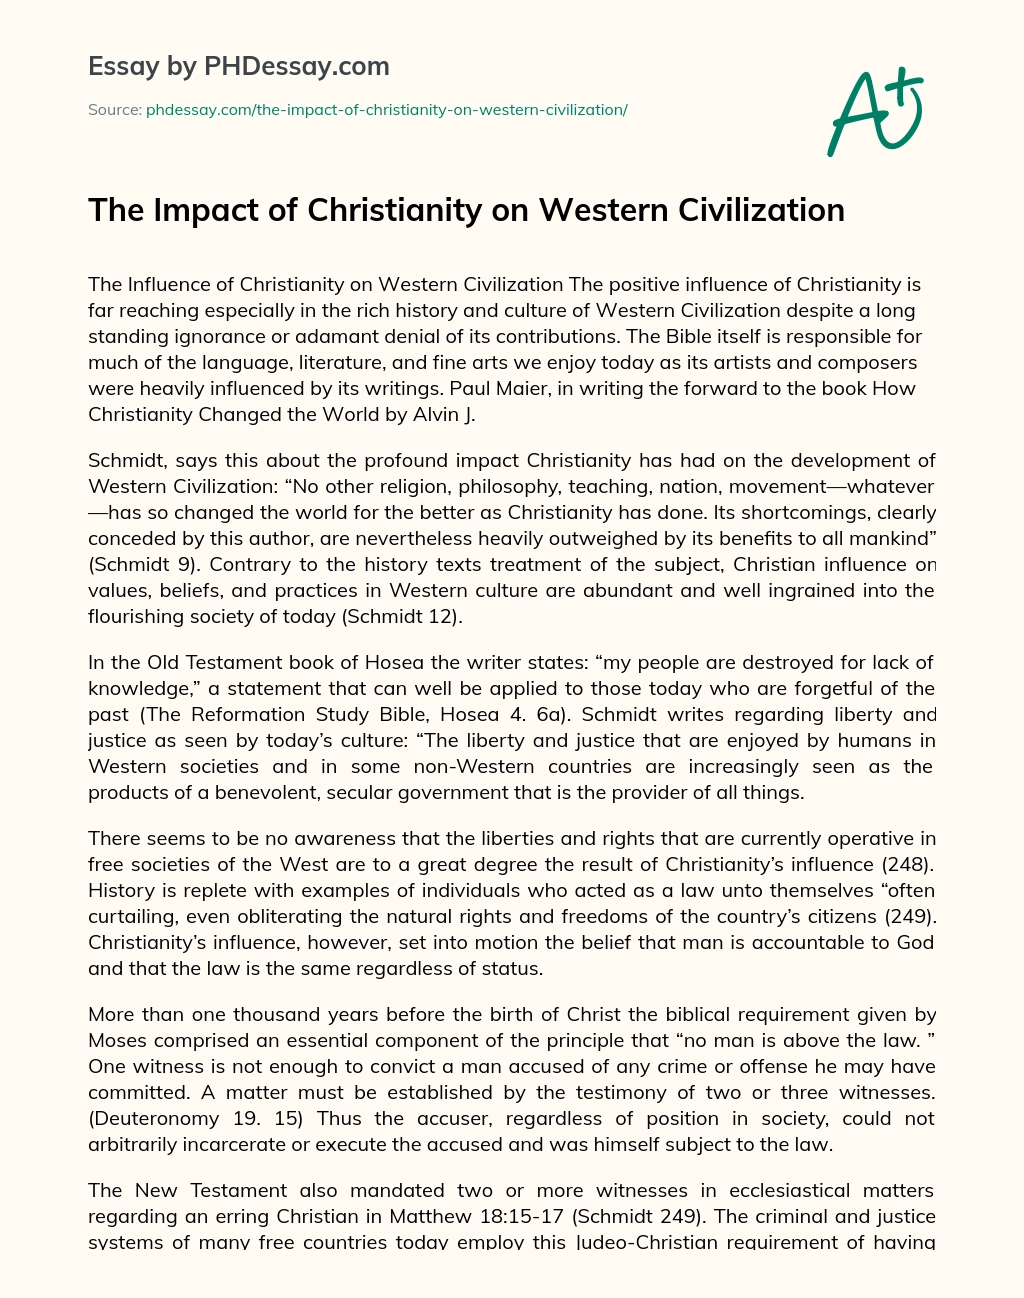 The Impact of Christianity on Western Civilization essay